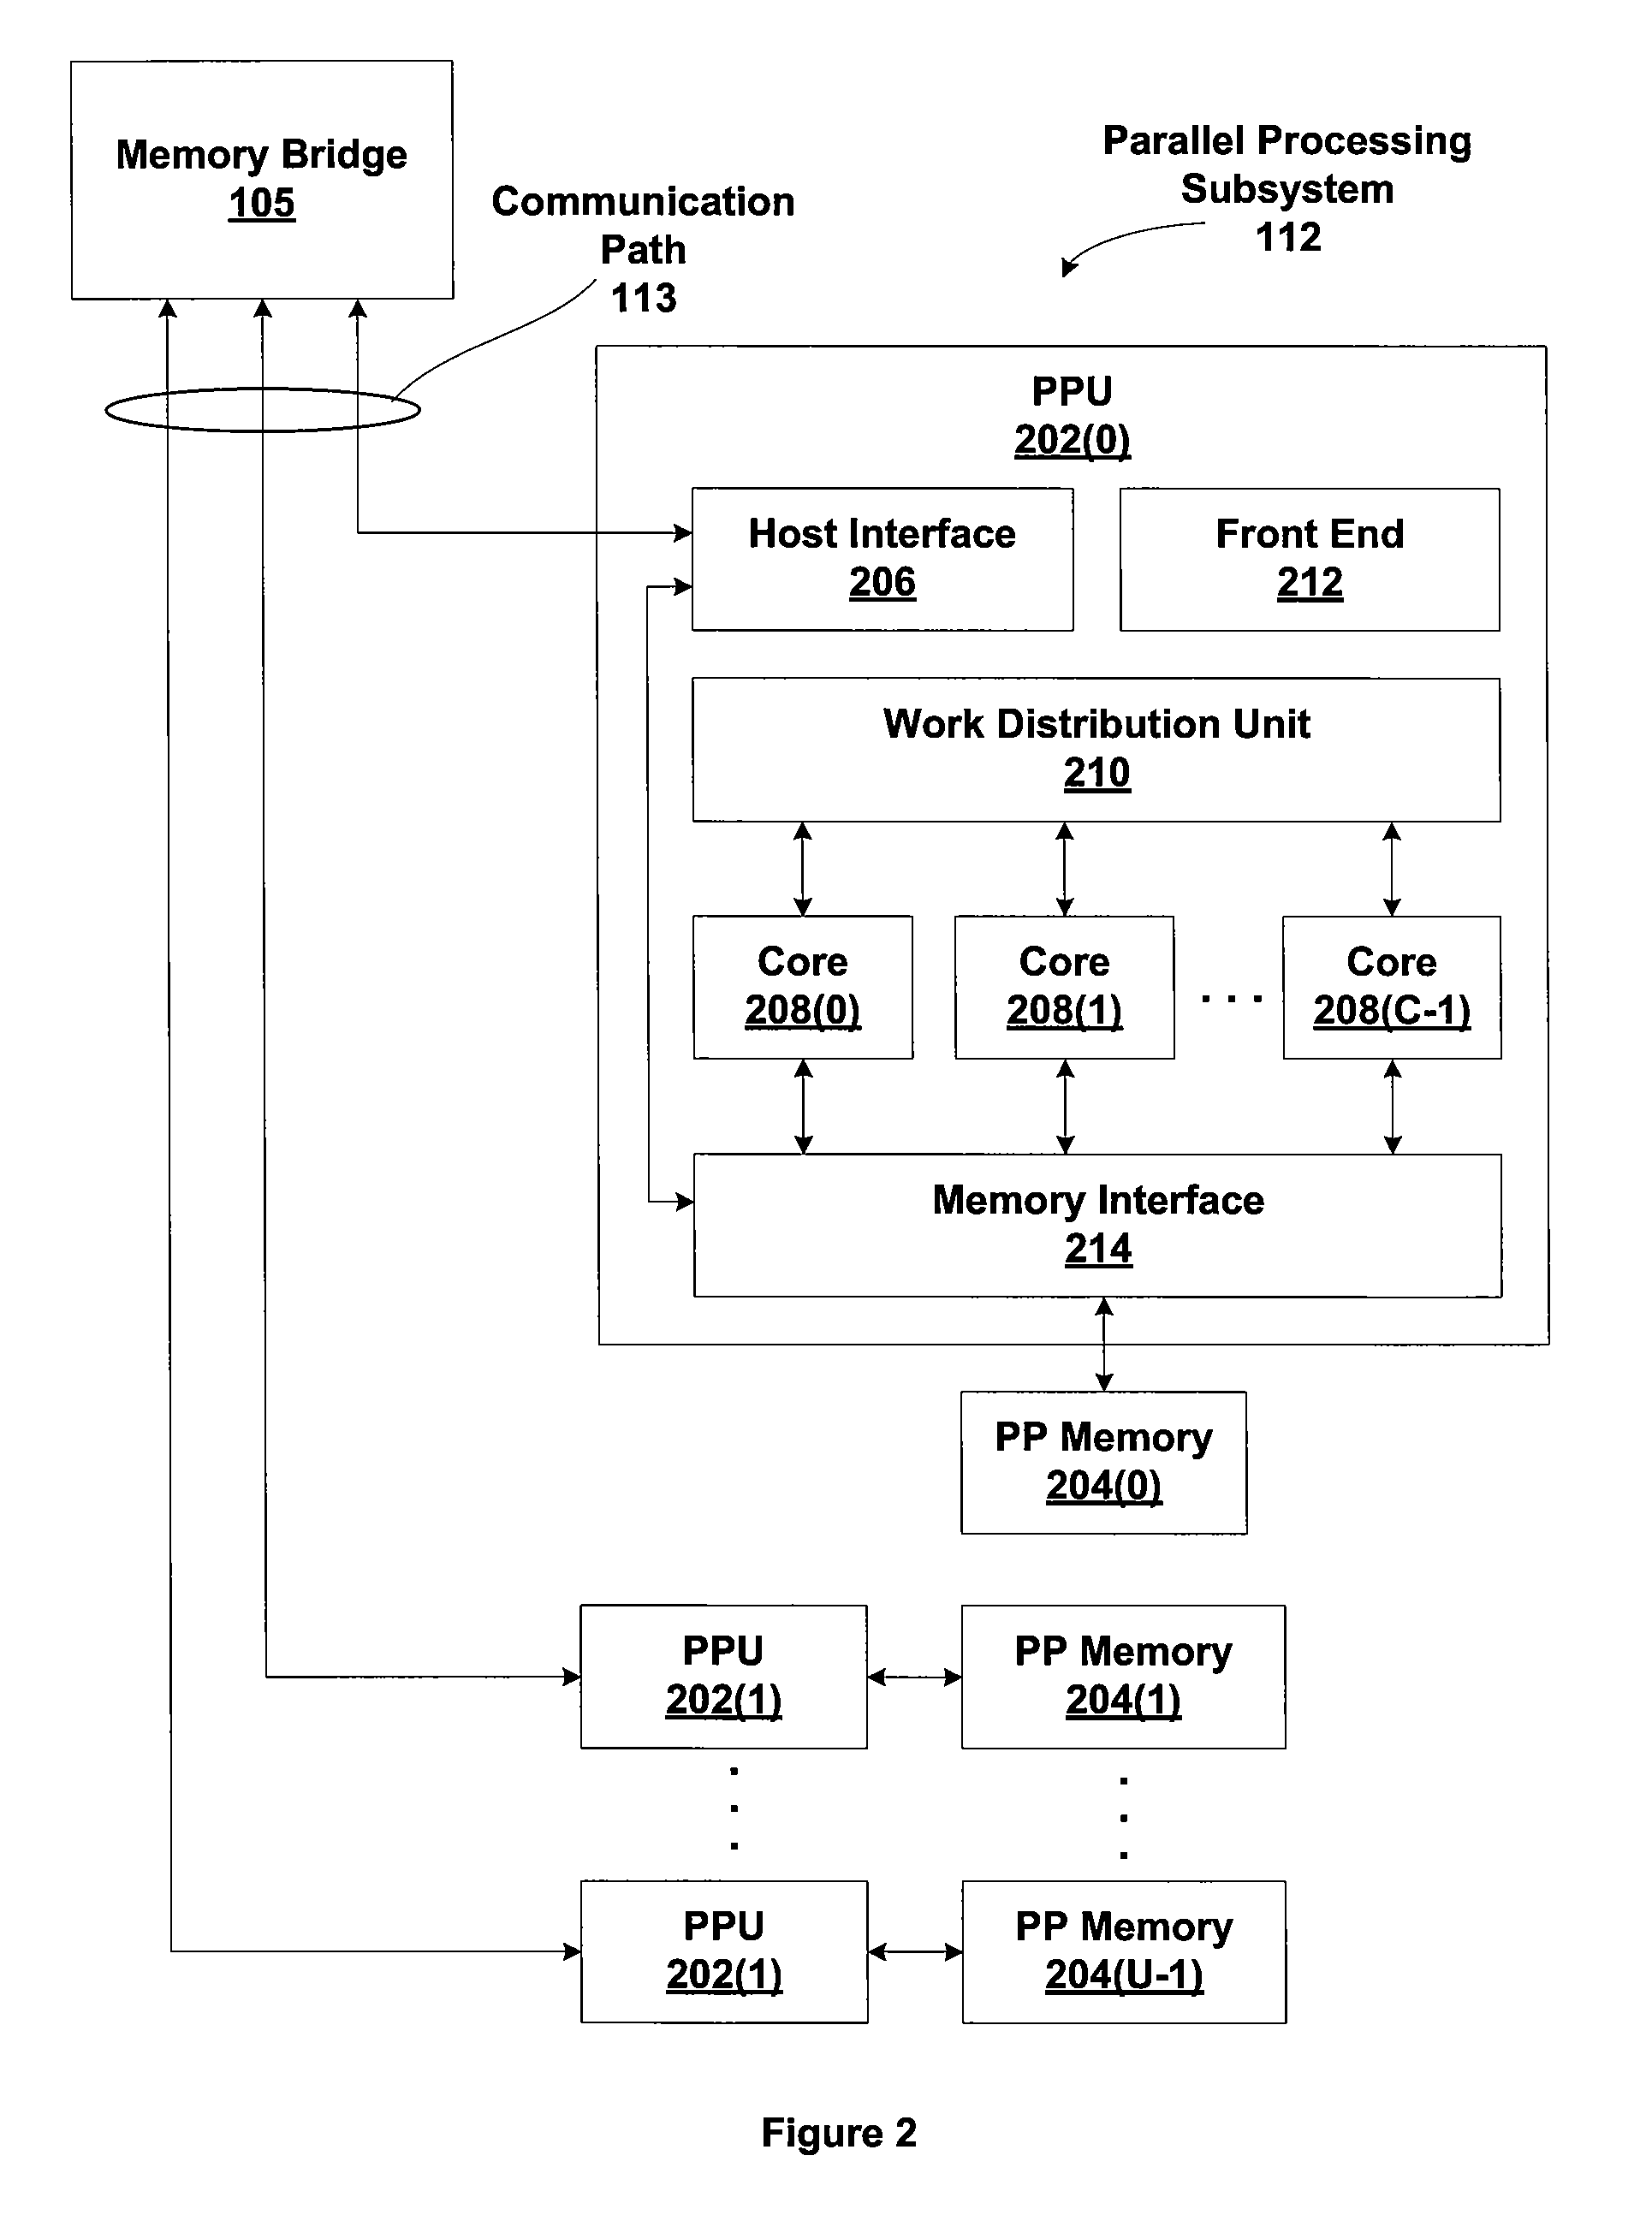 Reduction operations in a synchronous parallel thread processing system with disabled execution threads